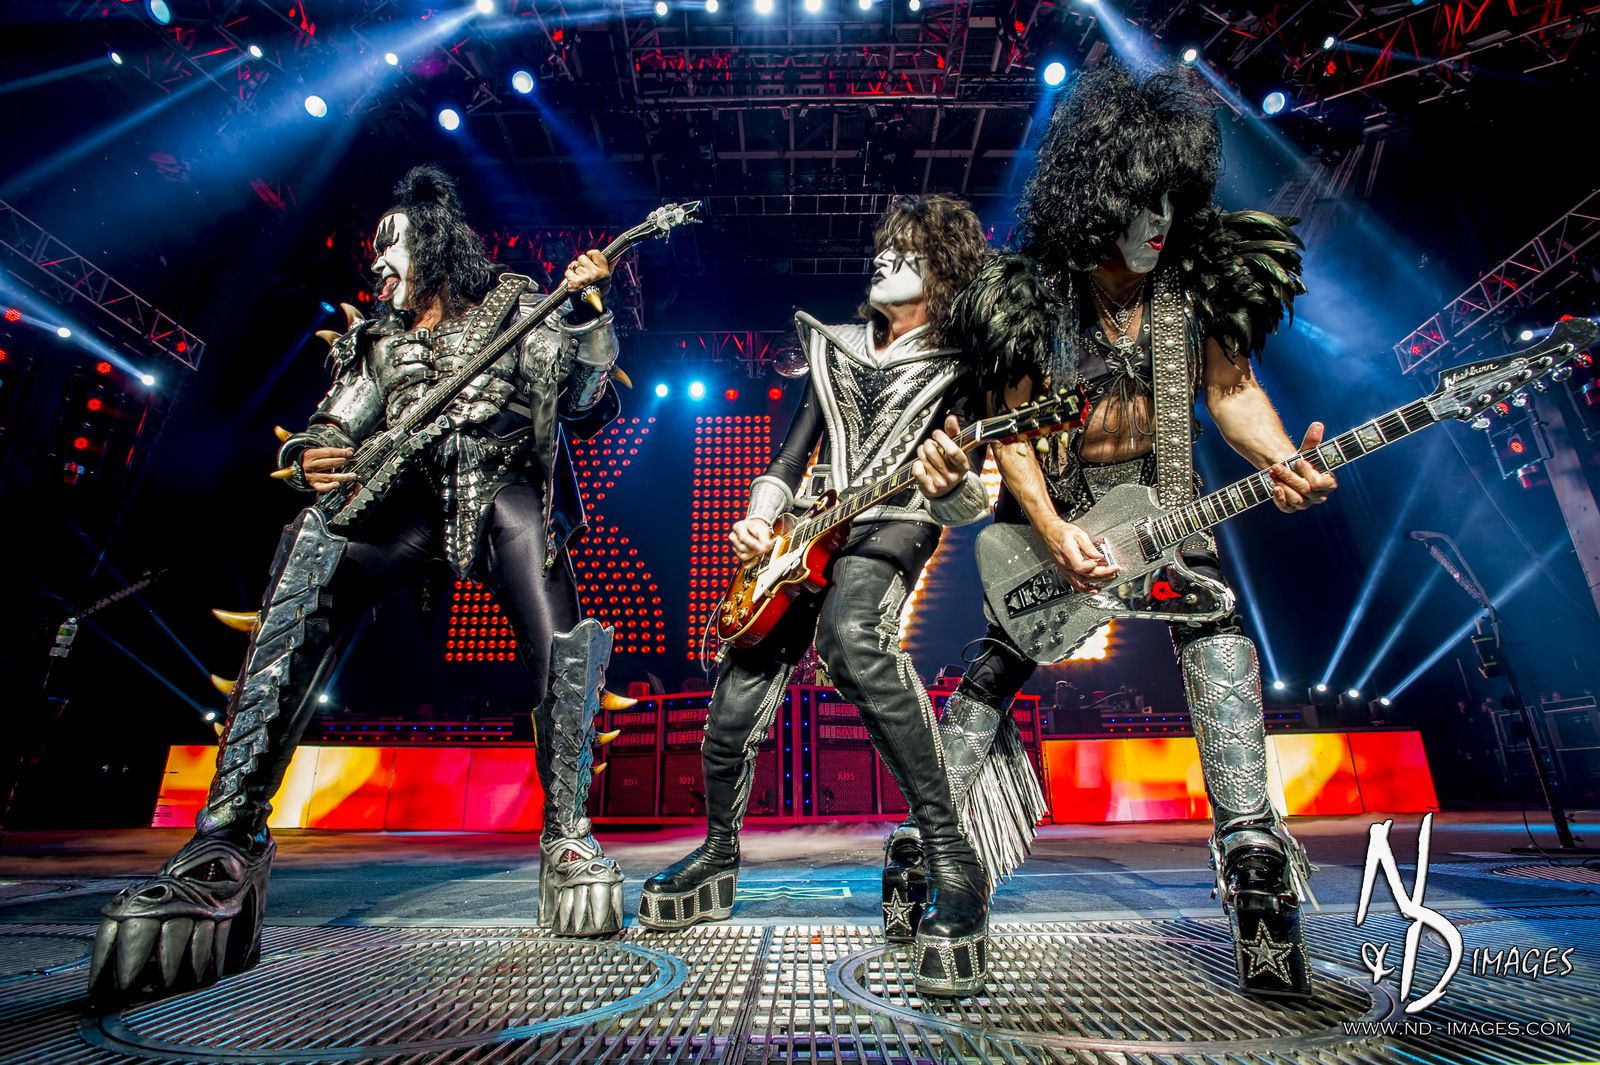 Gene Simmons - KISS Sep 16, 2012 at Comcast Center, Mansfield, MA (USA) - credit: N&D Images